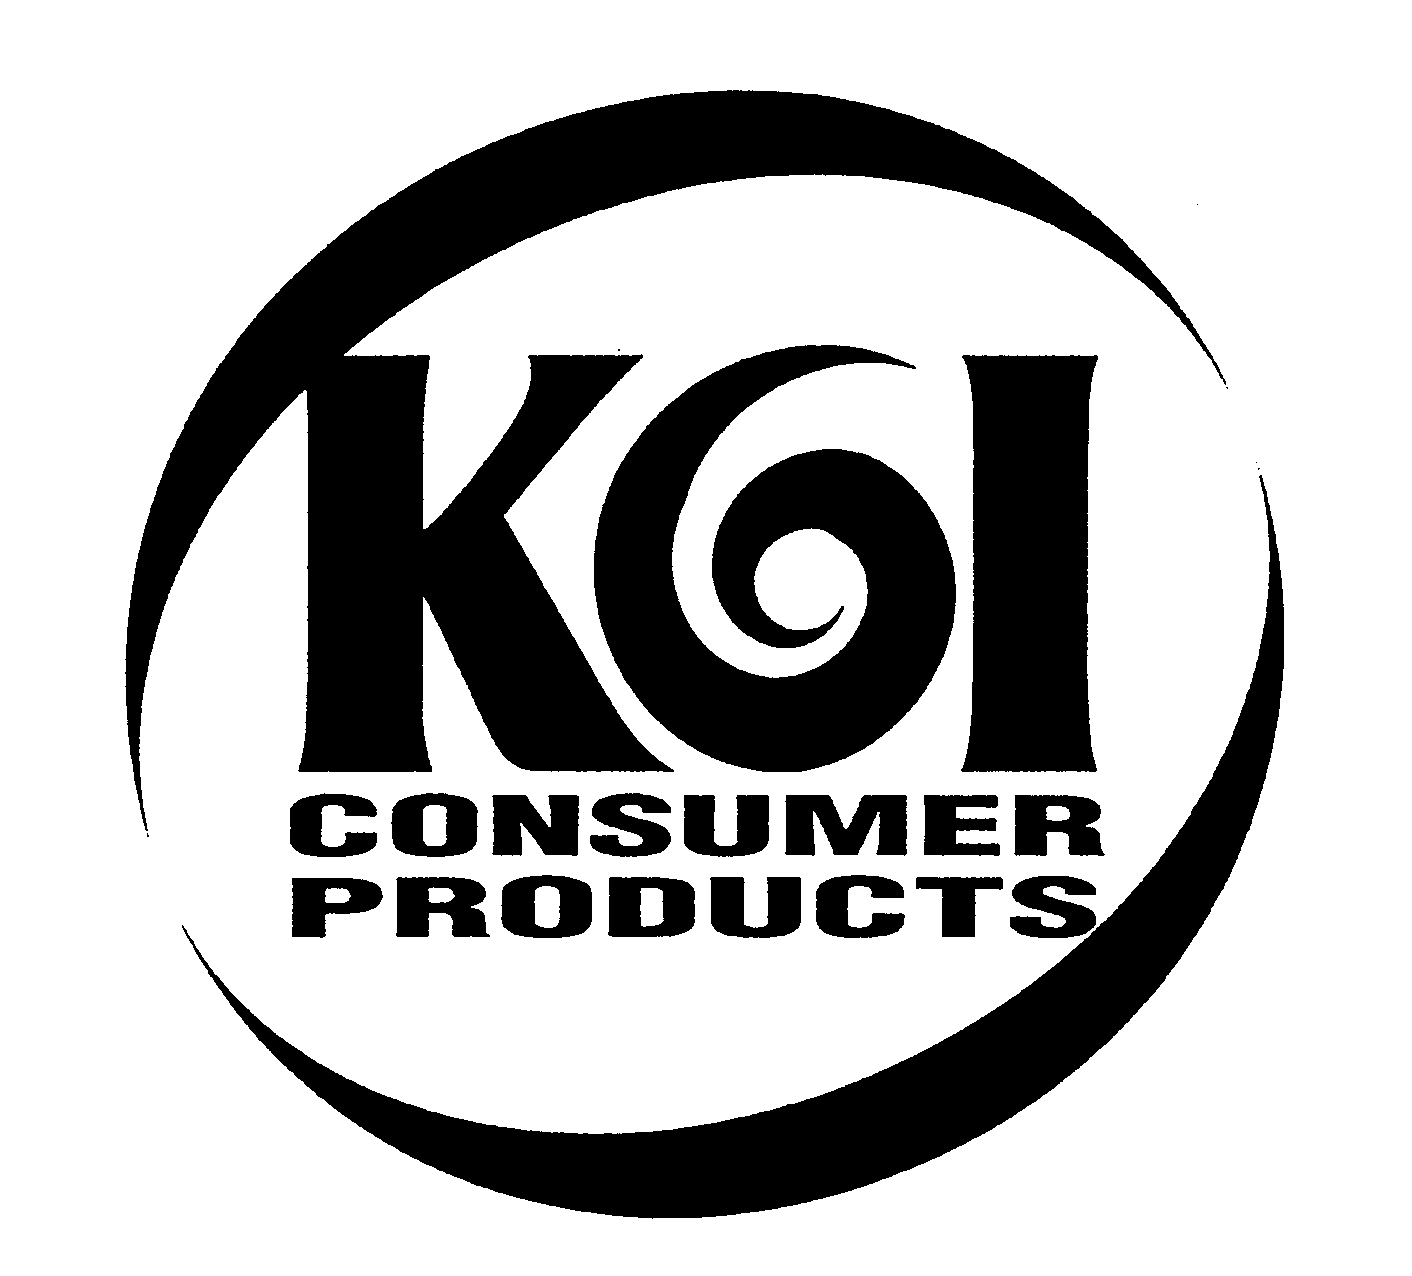  KGI CONSUMER PRODUCTS